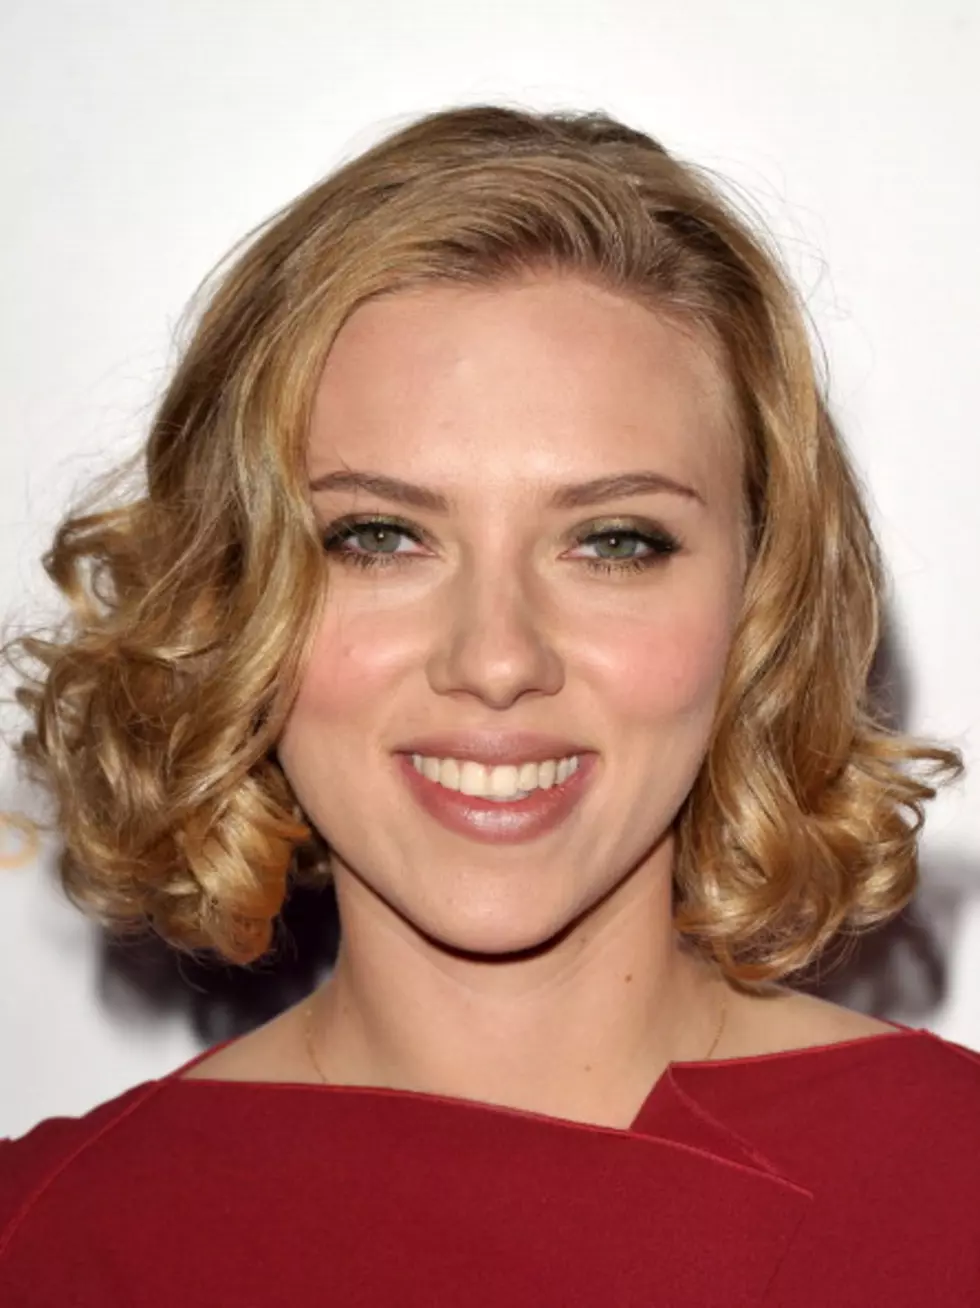 Scarlett Johansson Nude Pics Leaked By Cell Phone Hackers [NSFW LINKS]